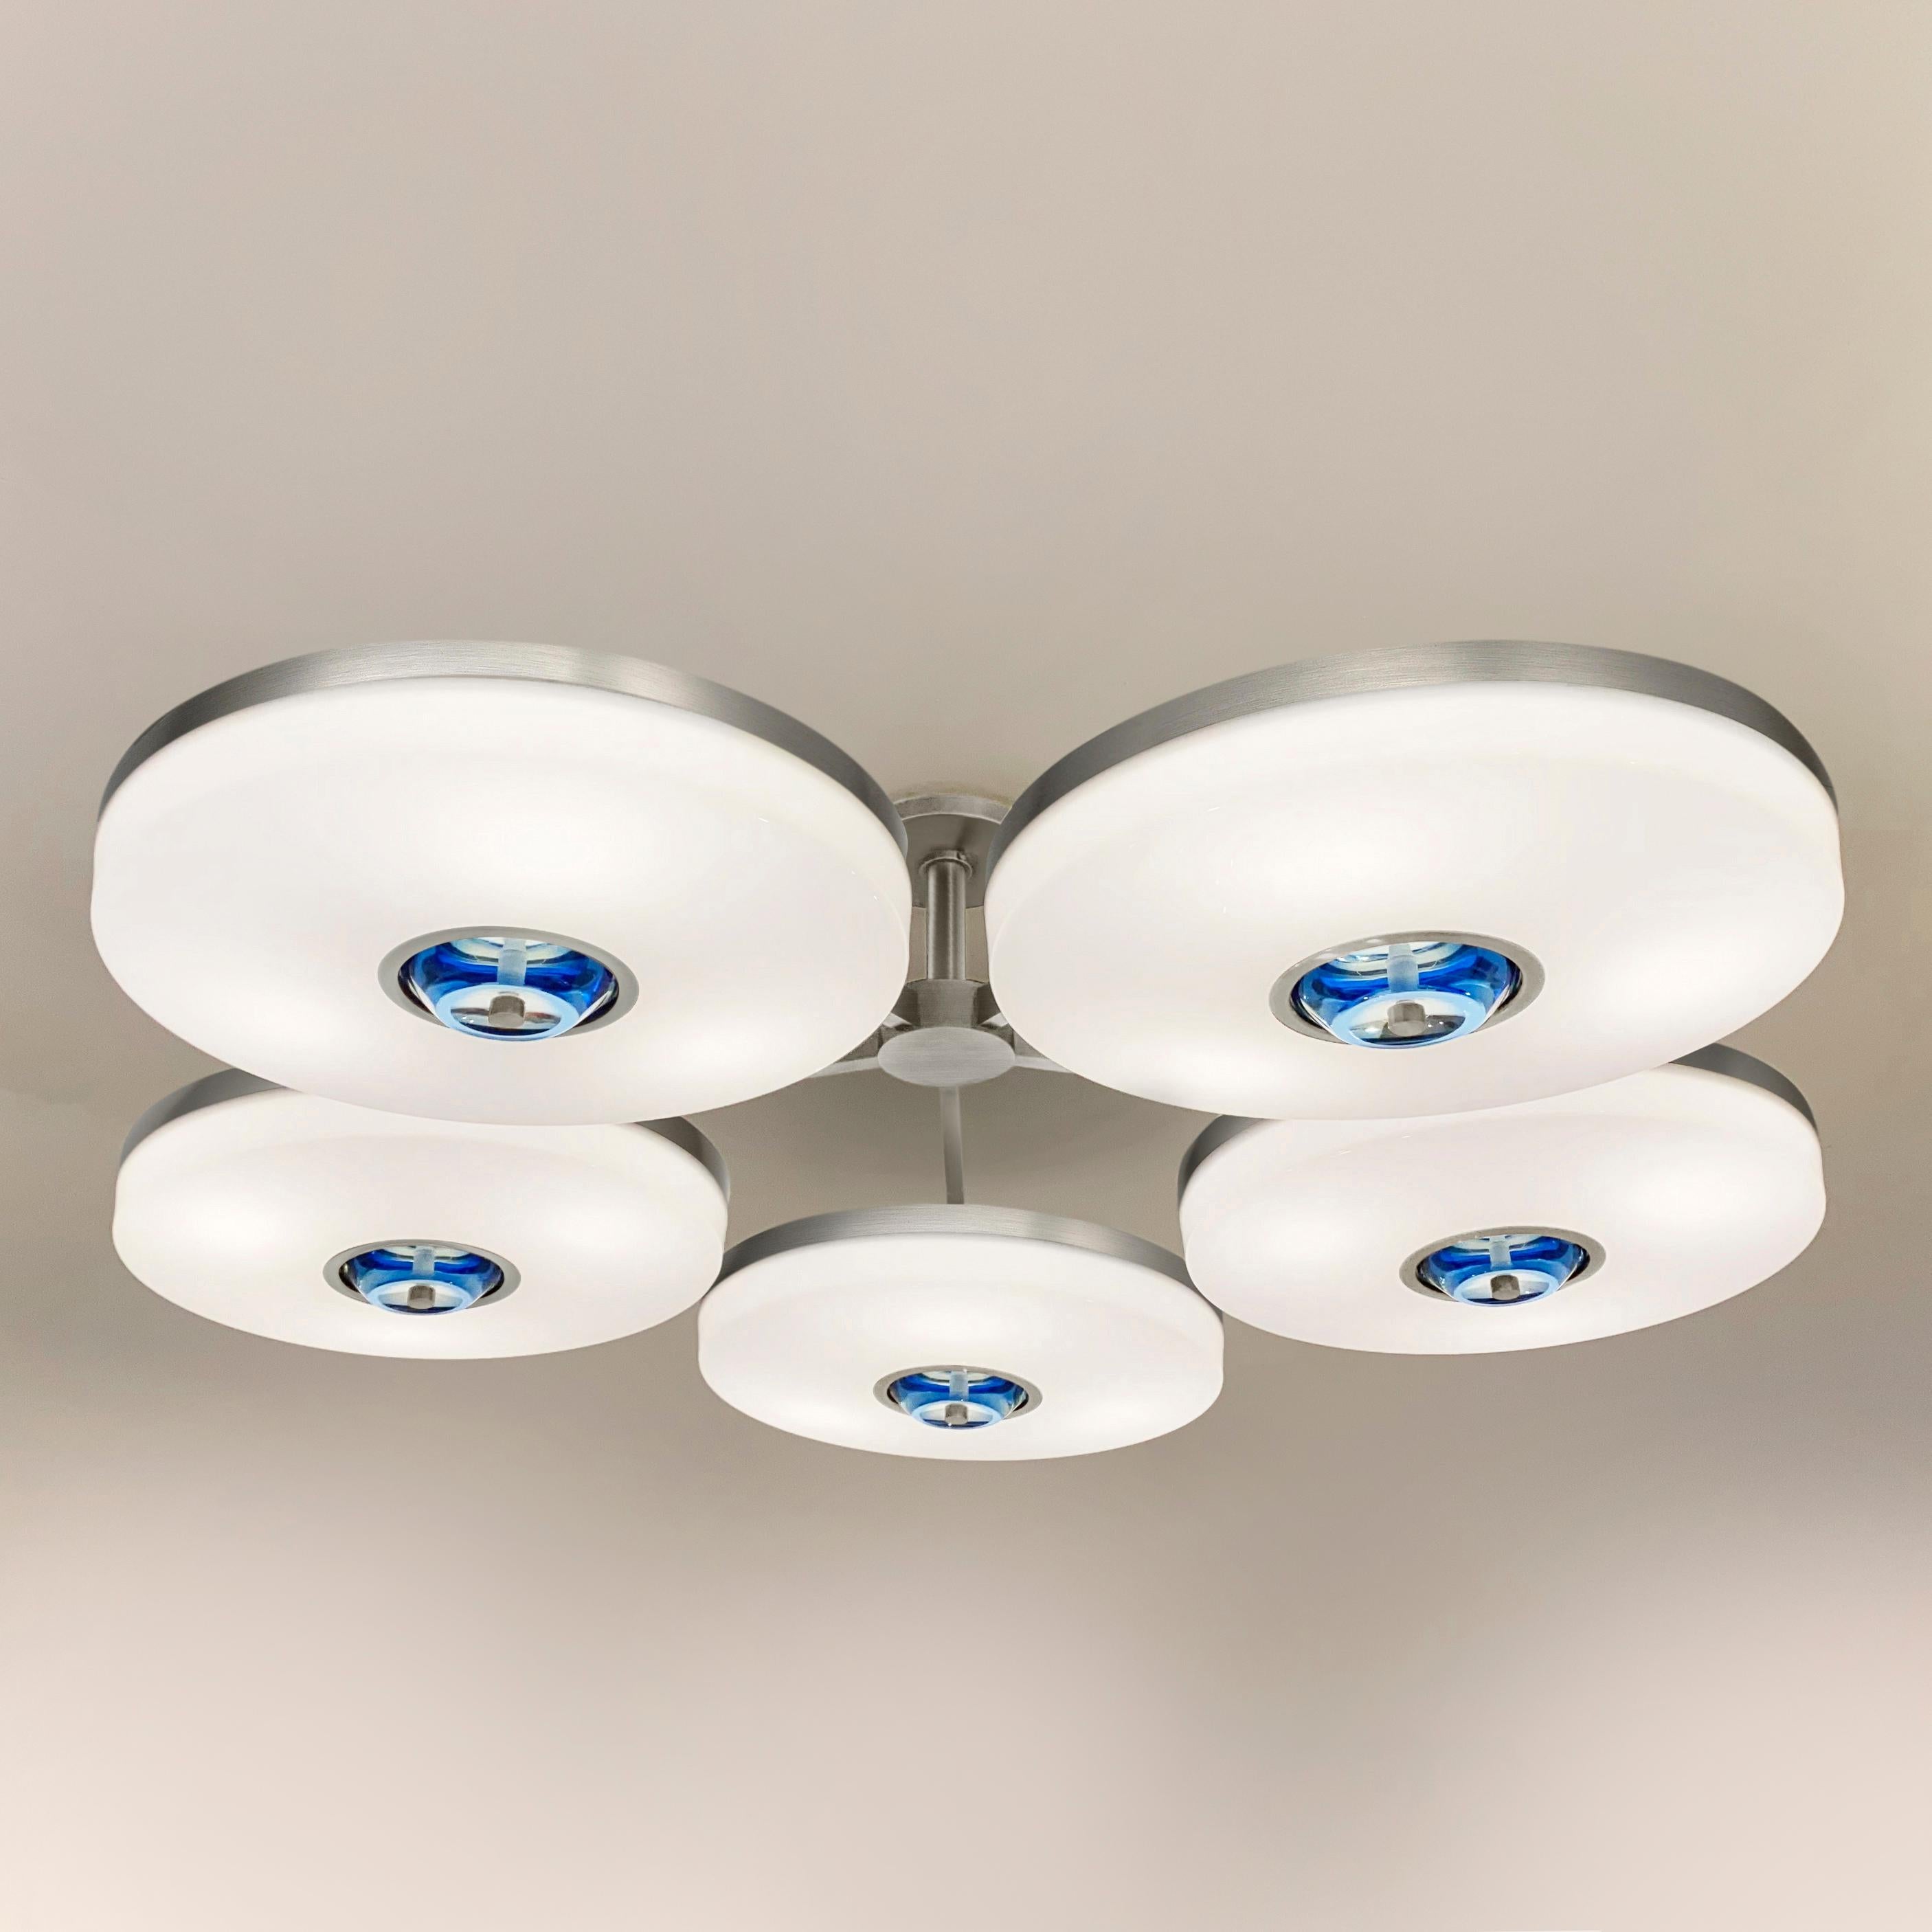 The Iris N.5 ceiling light is designed around five expansive acrylic shades with hand carved glass centers. This versatile fixture can be installed on a stem or as a flush mount. The first images show the fixture in our satin nickel